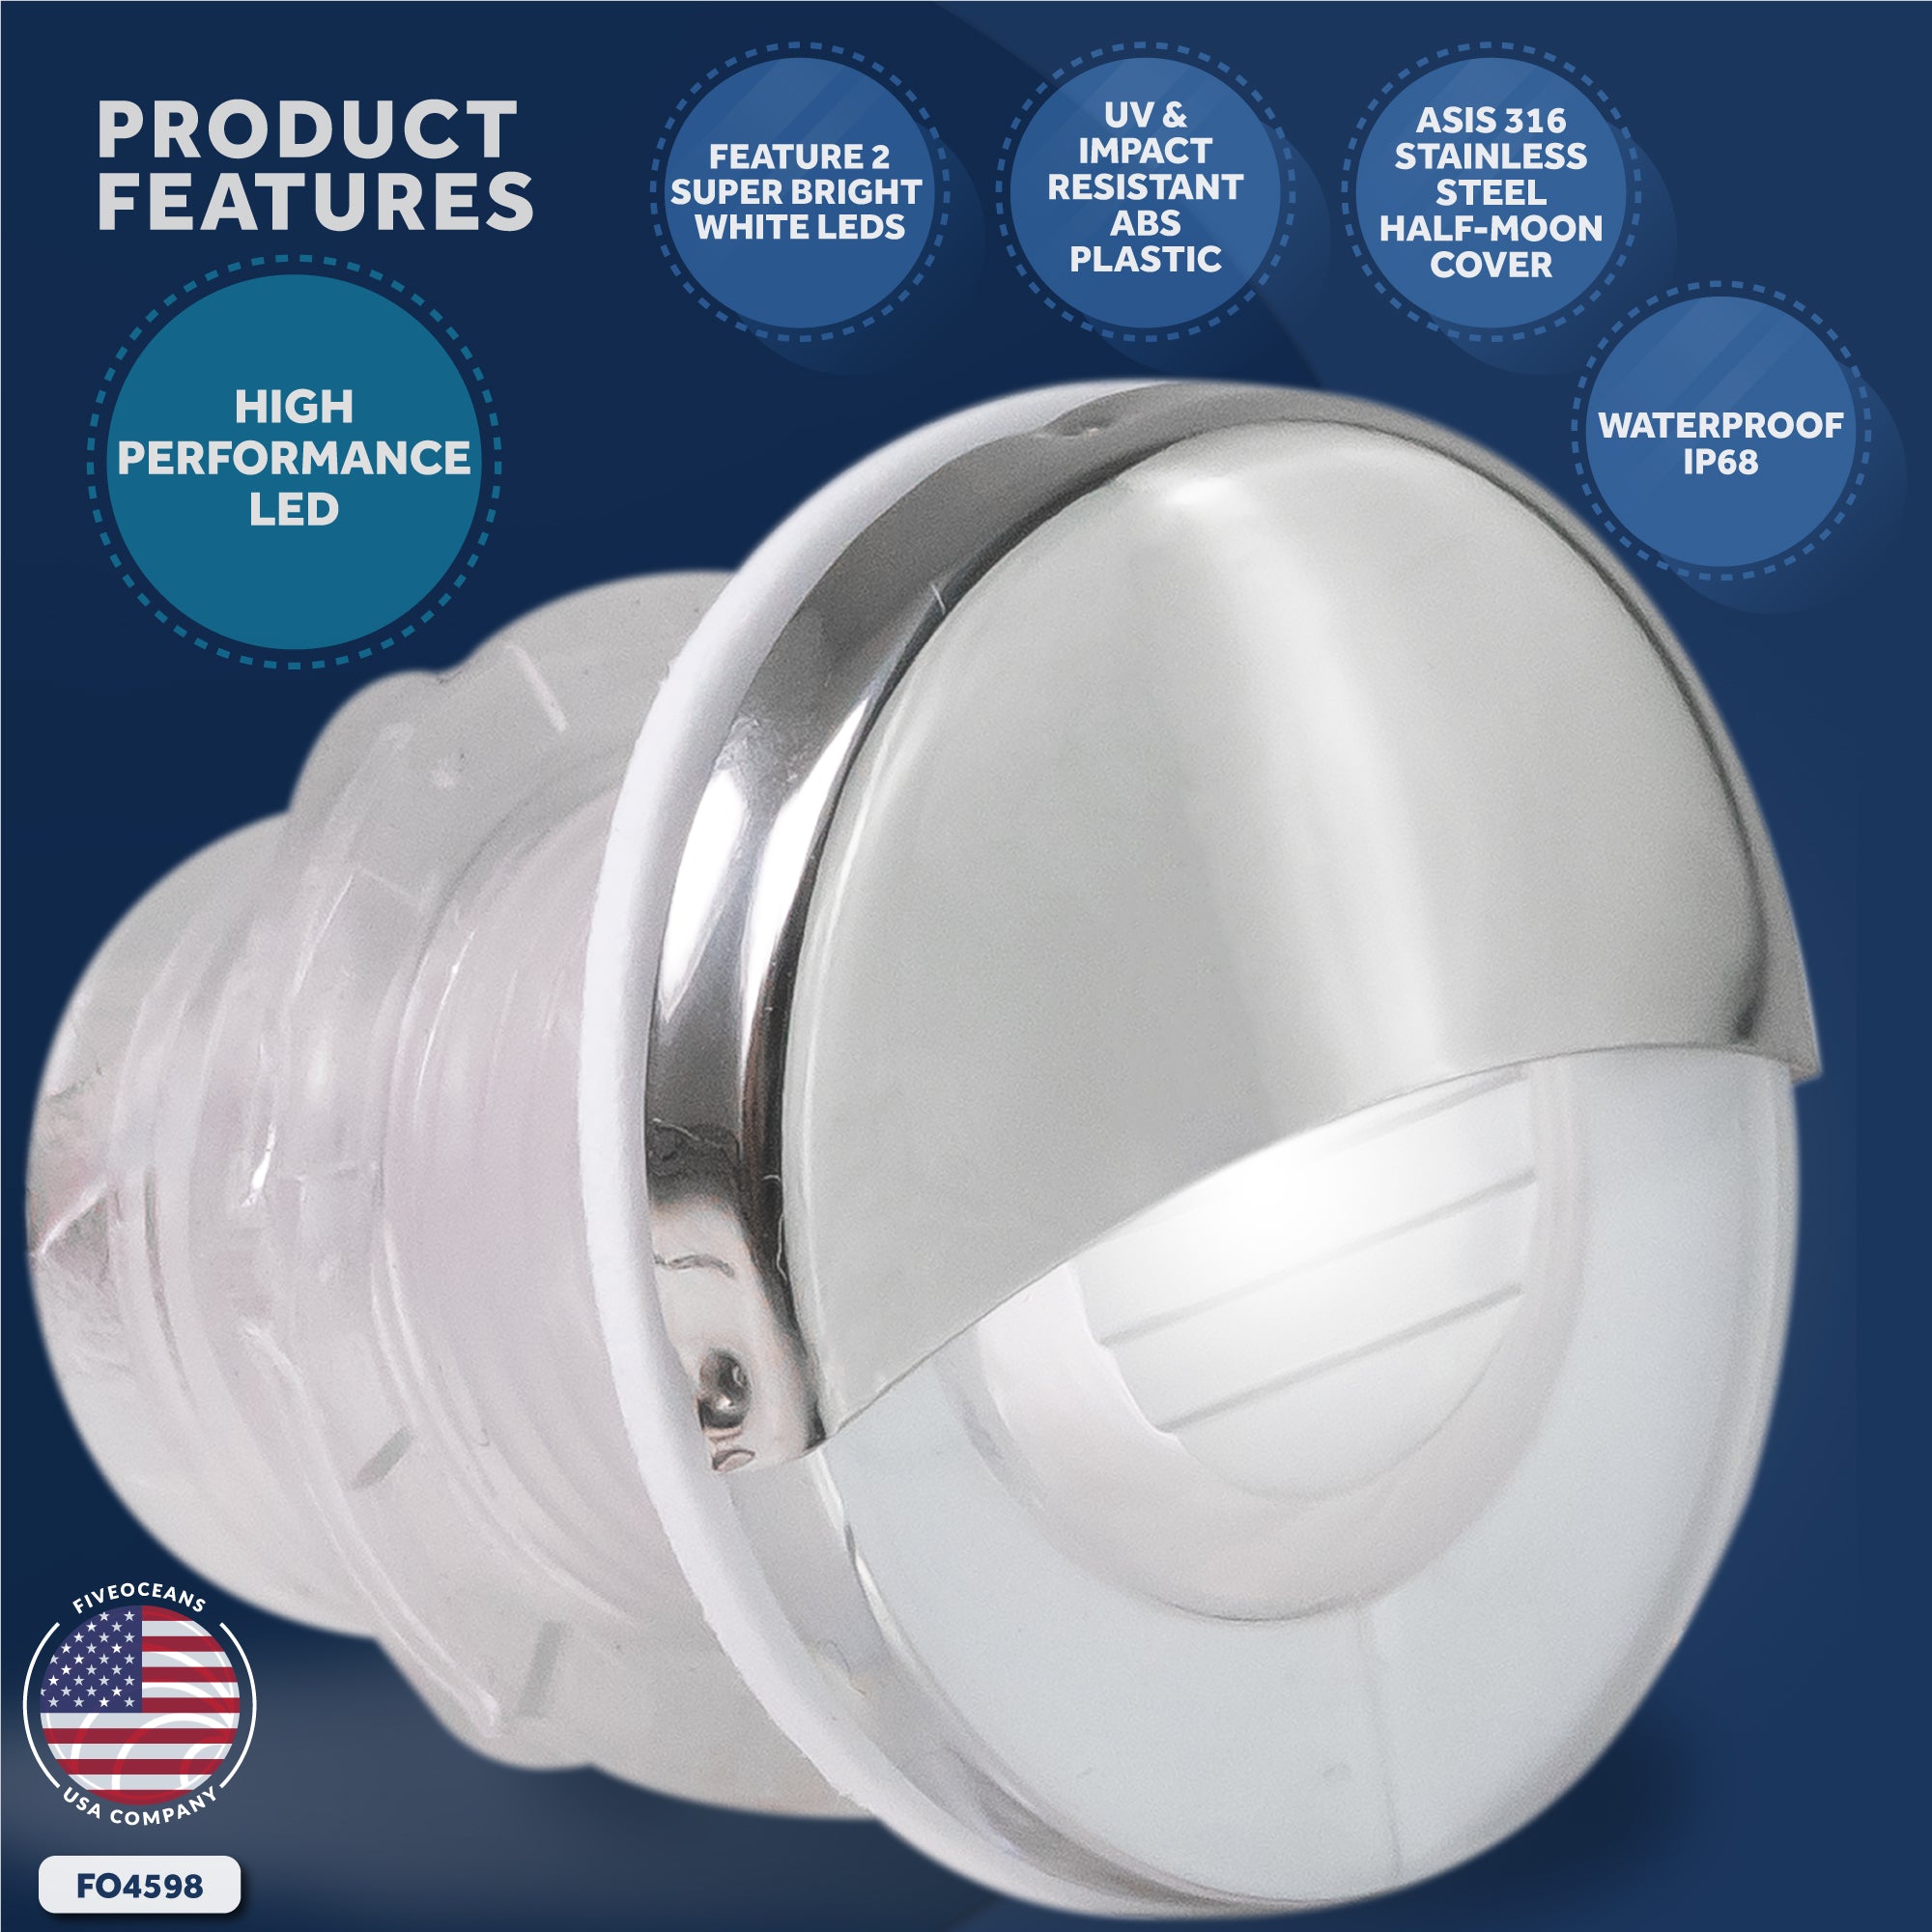 Livewell Courtesy Light, Round Accent, White LED - FO4598